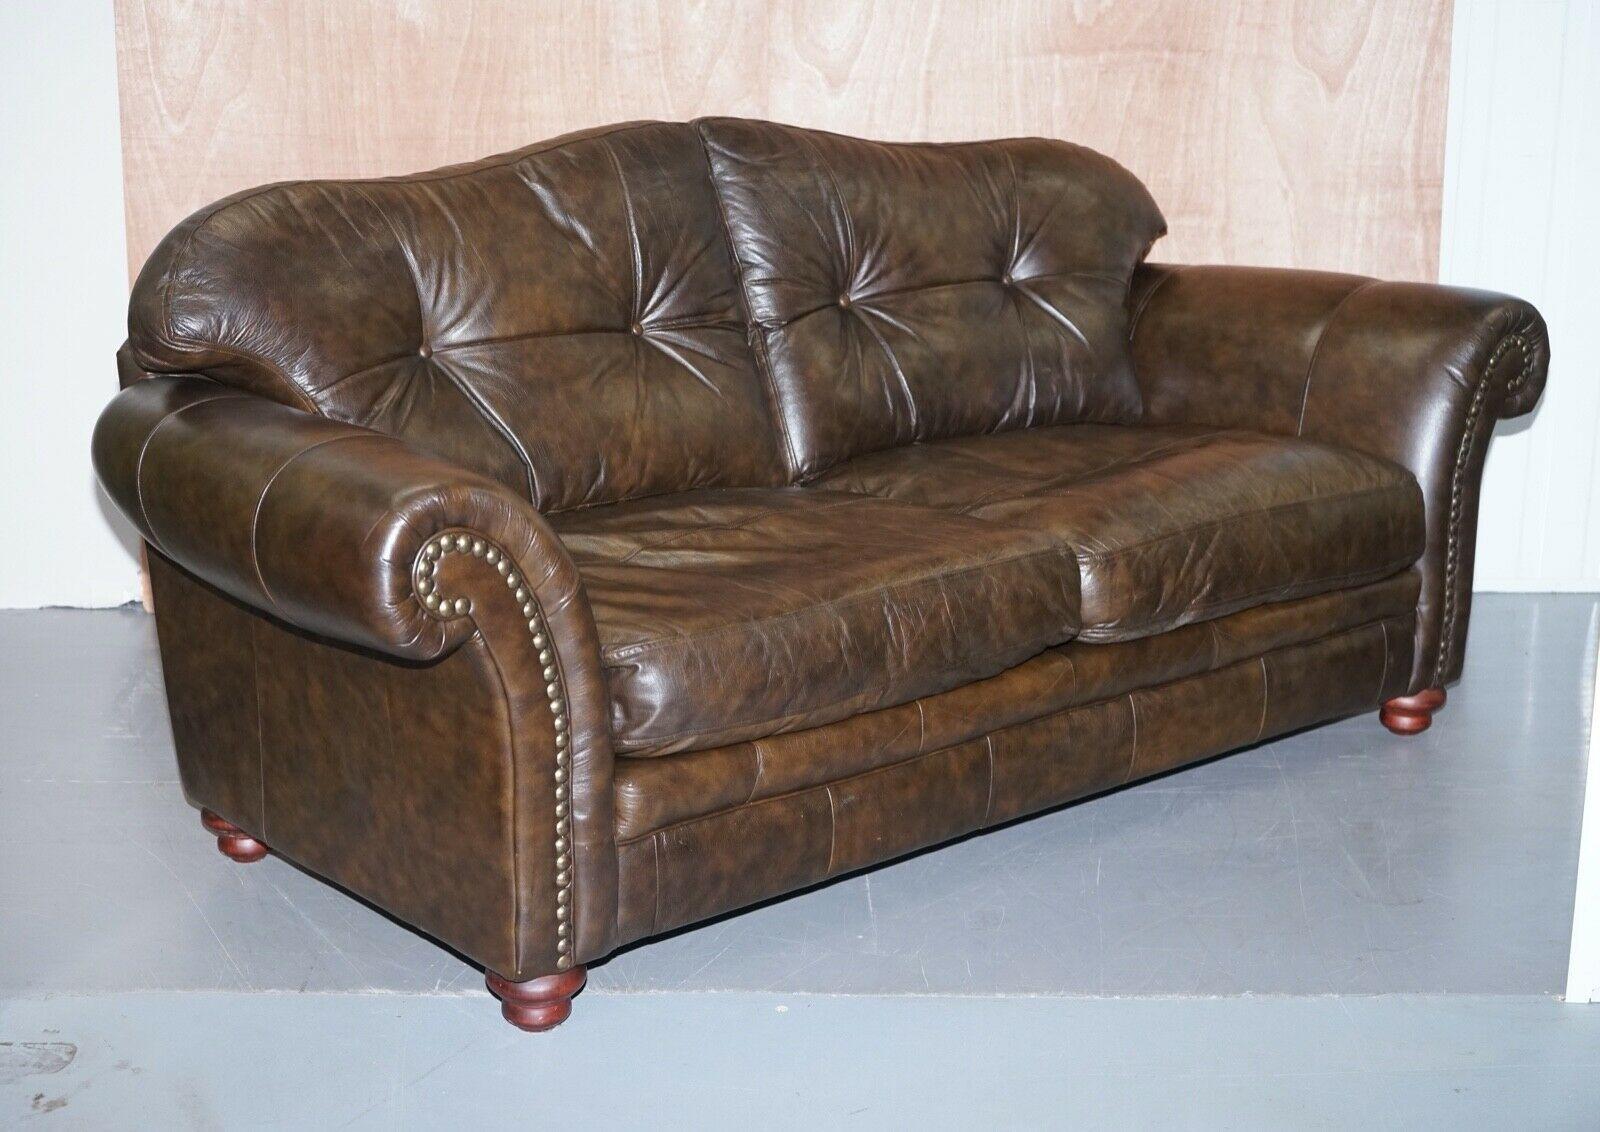 20th Century Lovely Tetrad Brown Leather 2 Seater Chesterfield Sofa with Scroll Arms